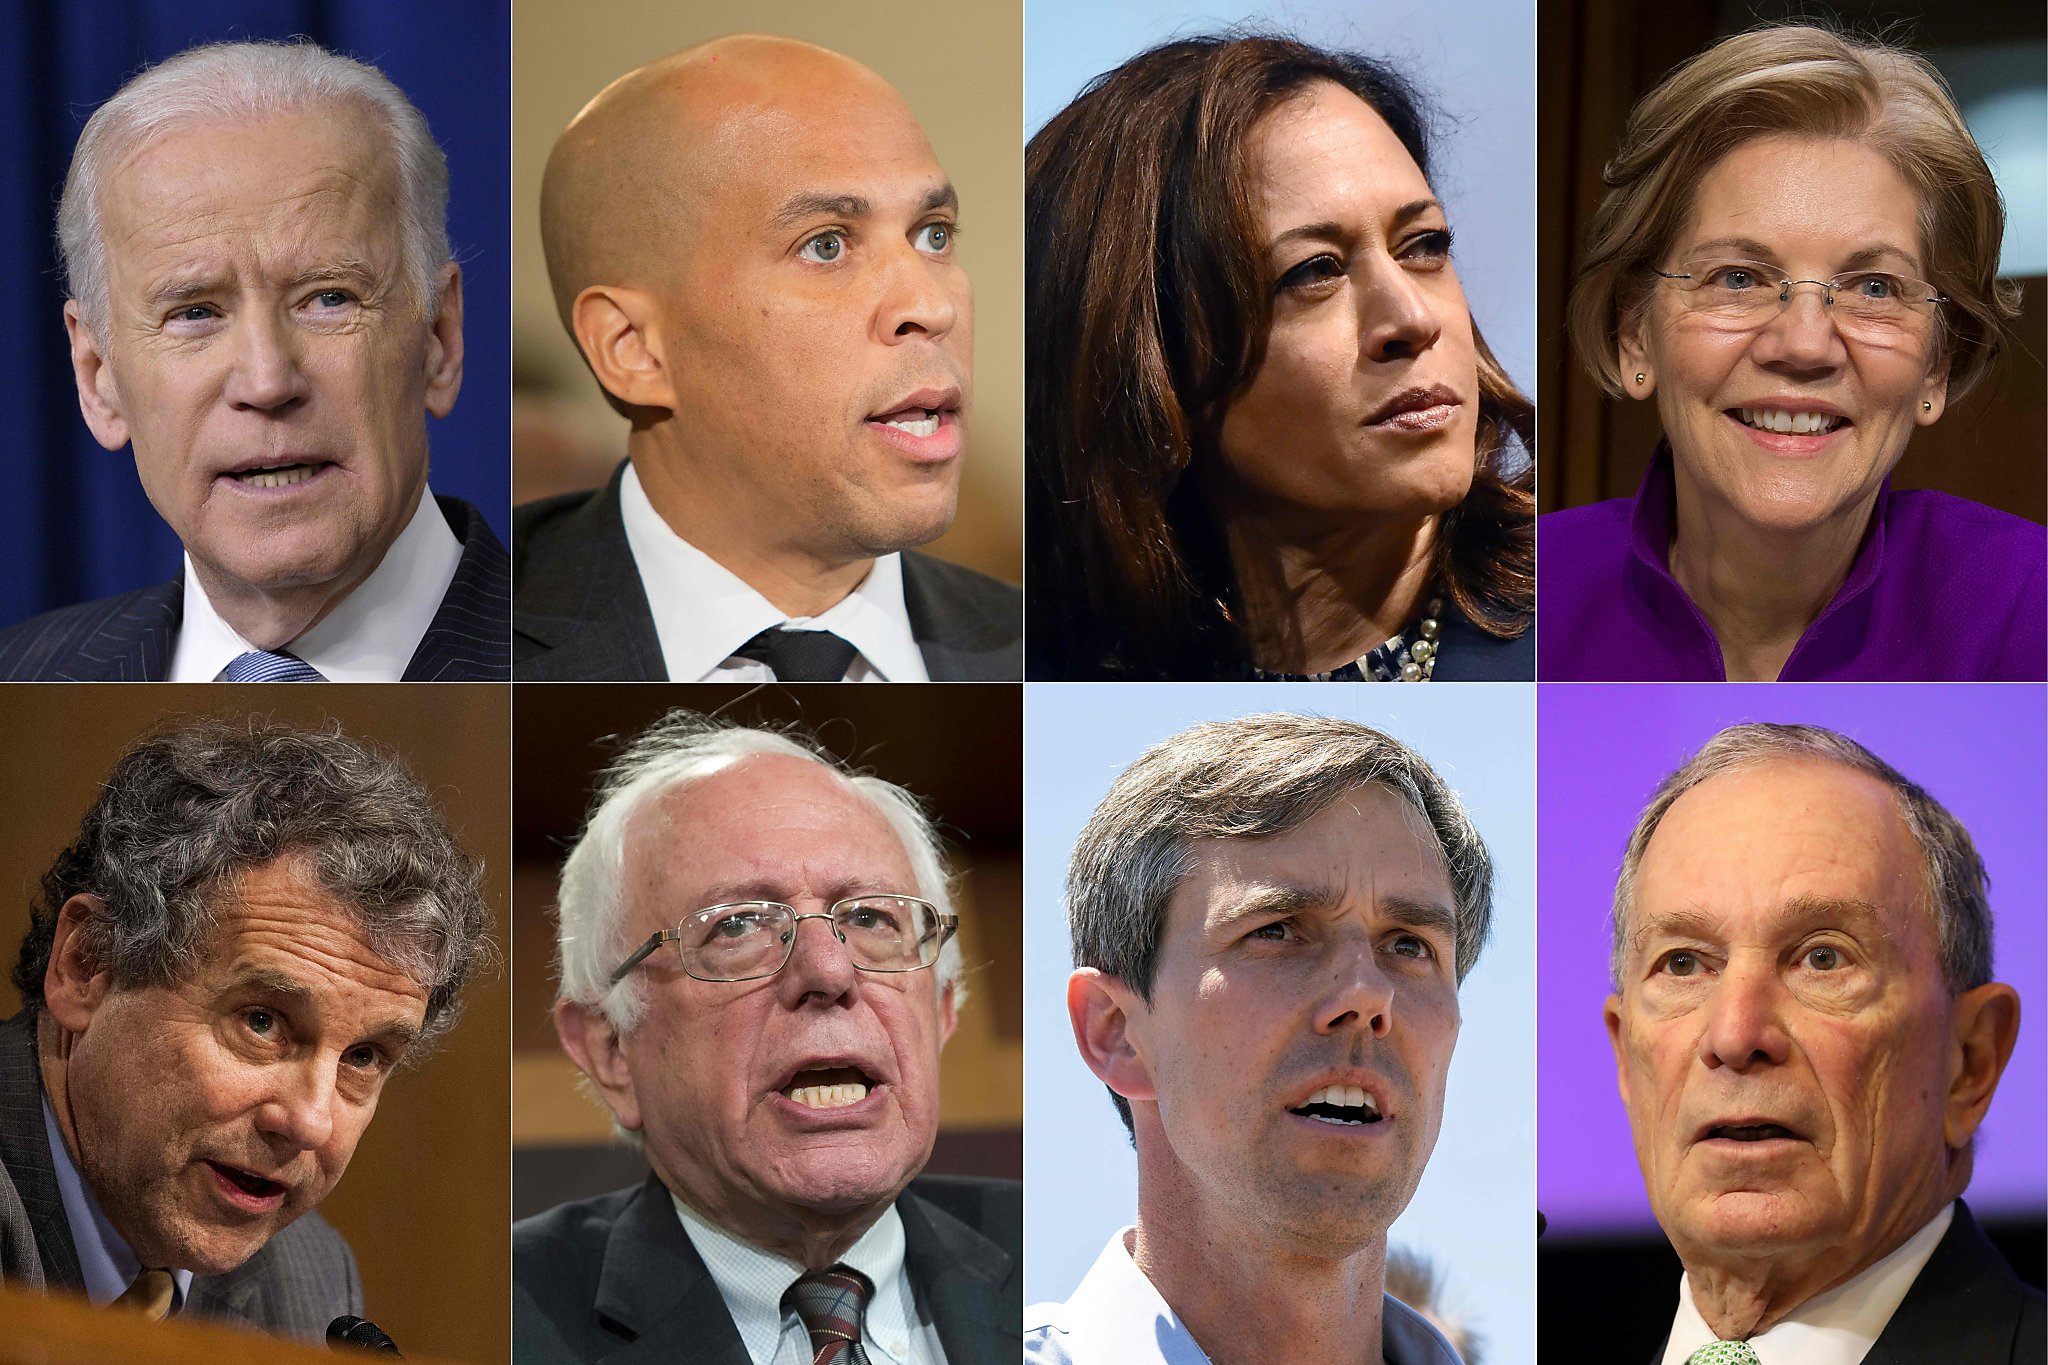 Who is running for president in 2020 so far?